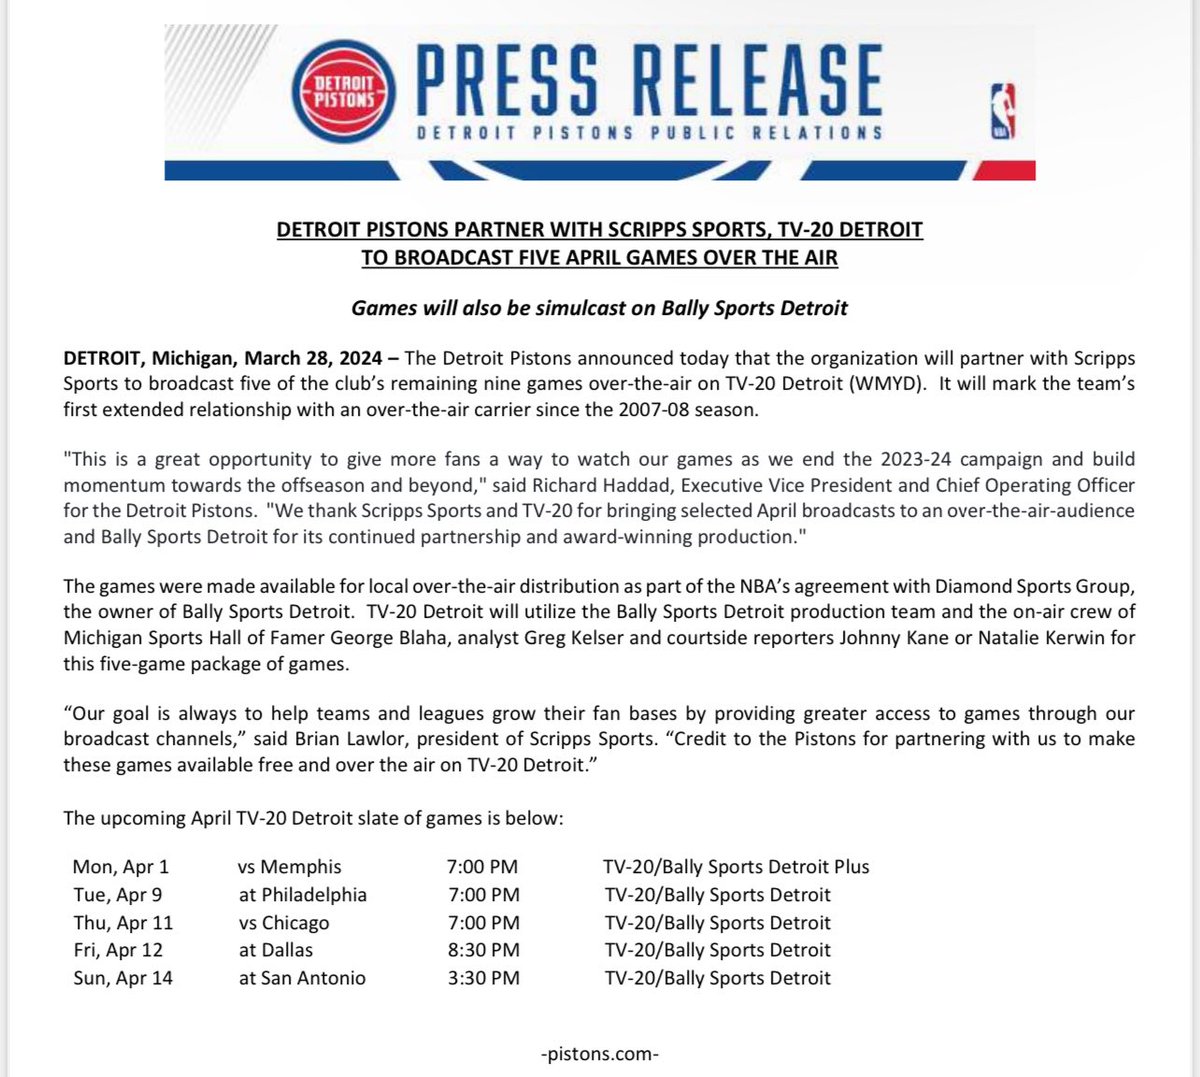 The @DetroitPistons announced today that the organization will partner with Scripps Sports to broadcast five of the club’s remaining nine games over-the-air on TV-20 Detroit (WMYD).